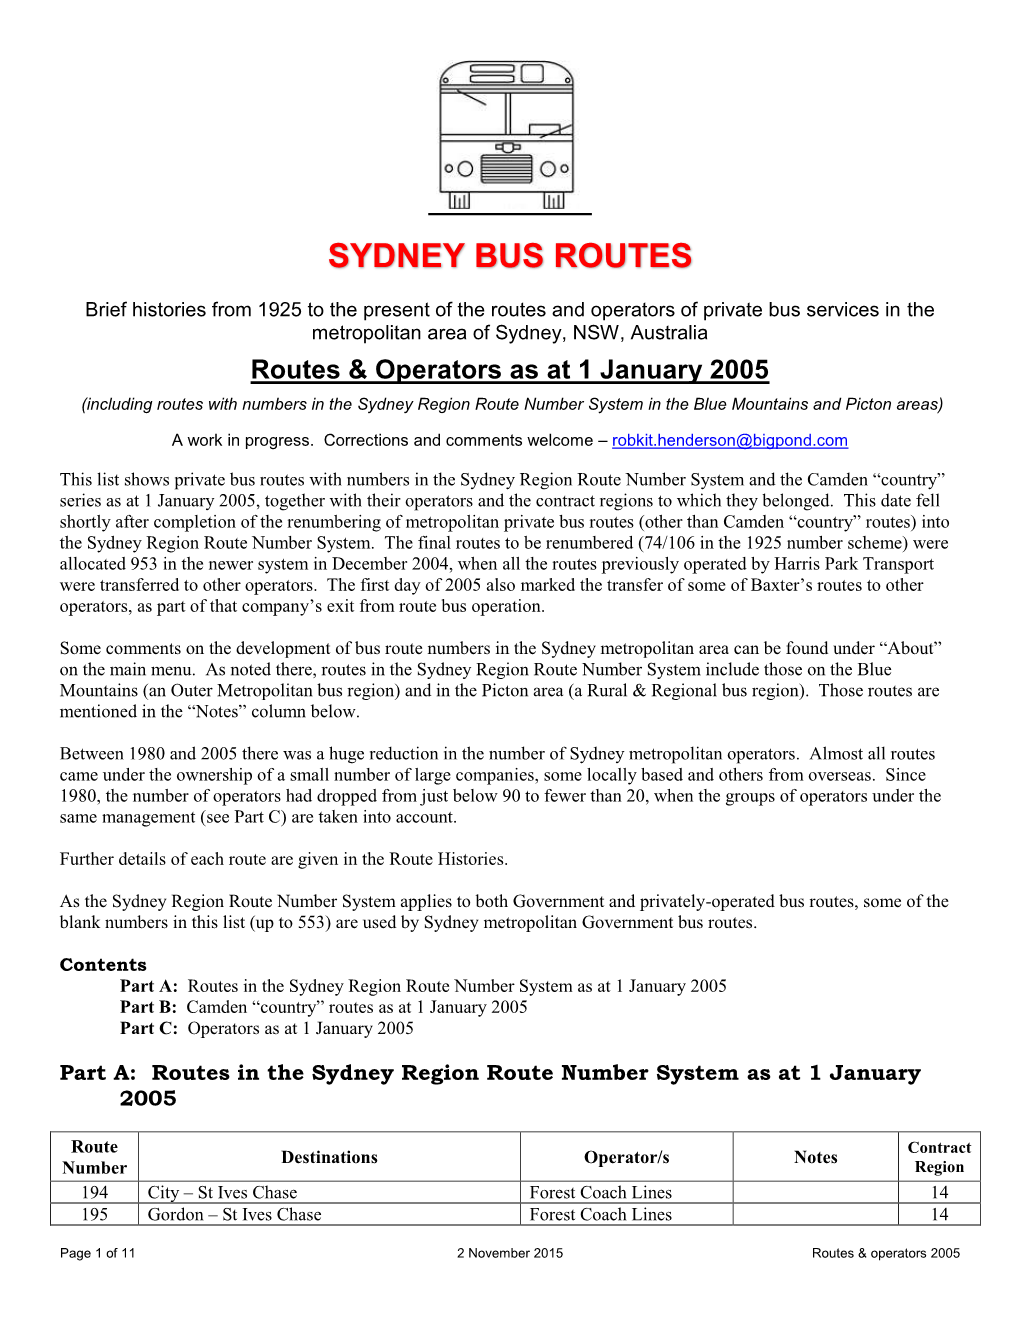 1 January 2005 (Including Routes with Numbers in the Sydney Region Route Number System in the Blue Mountains and Picton Areas)